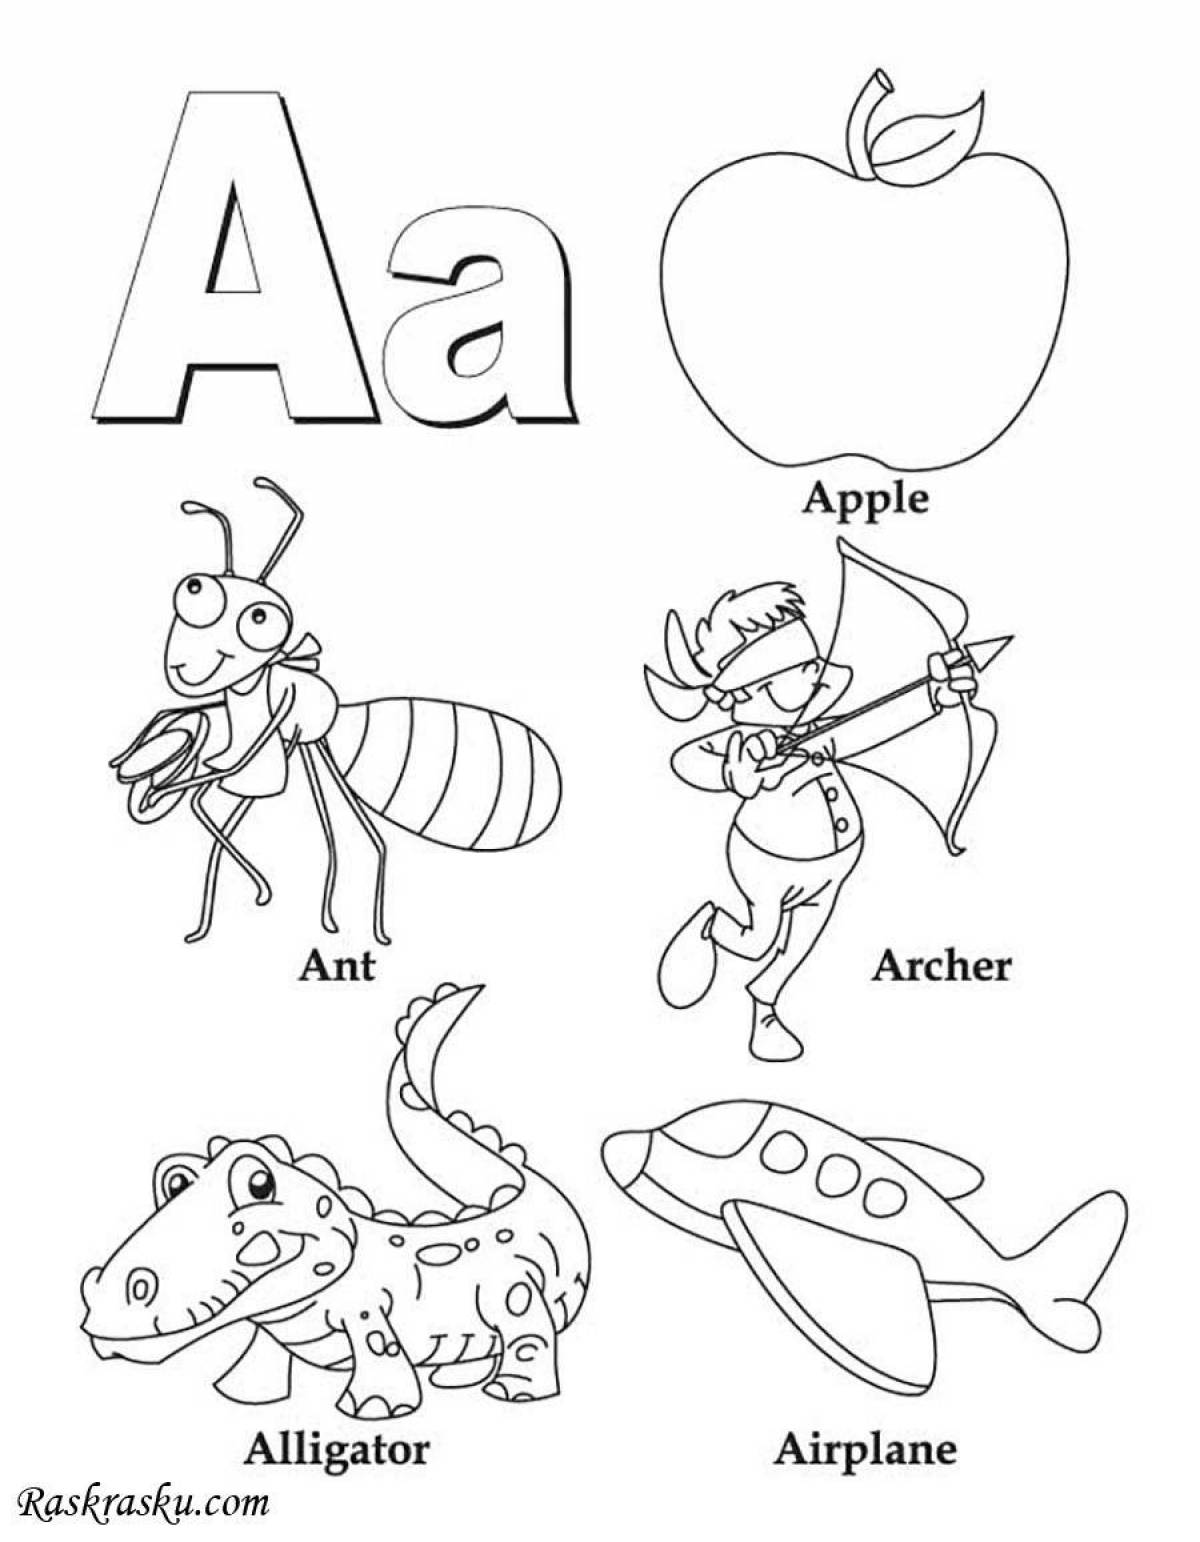 English alphabet in pictures #9